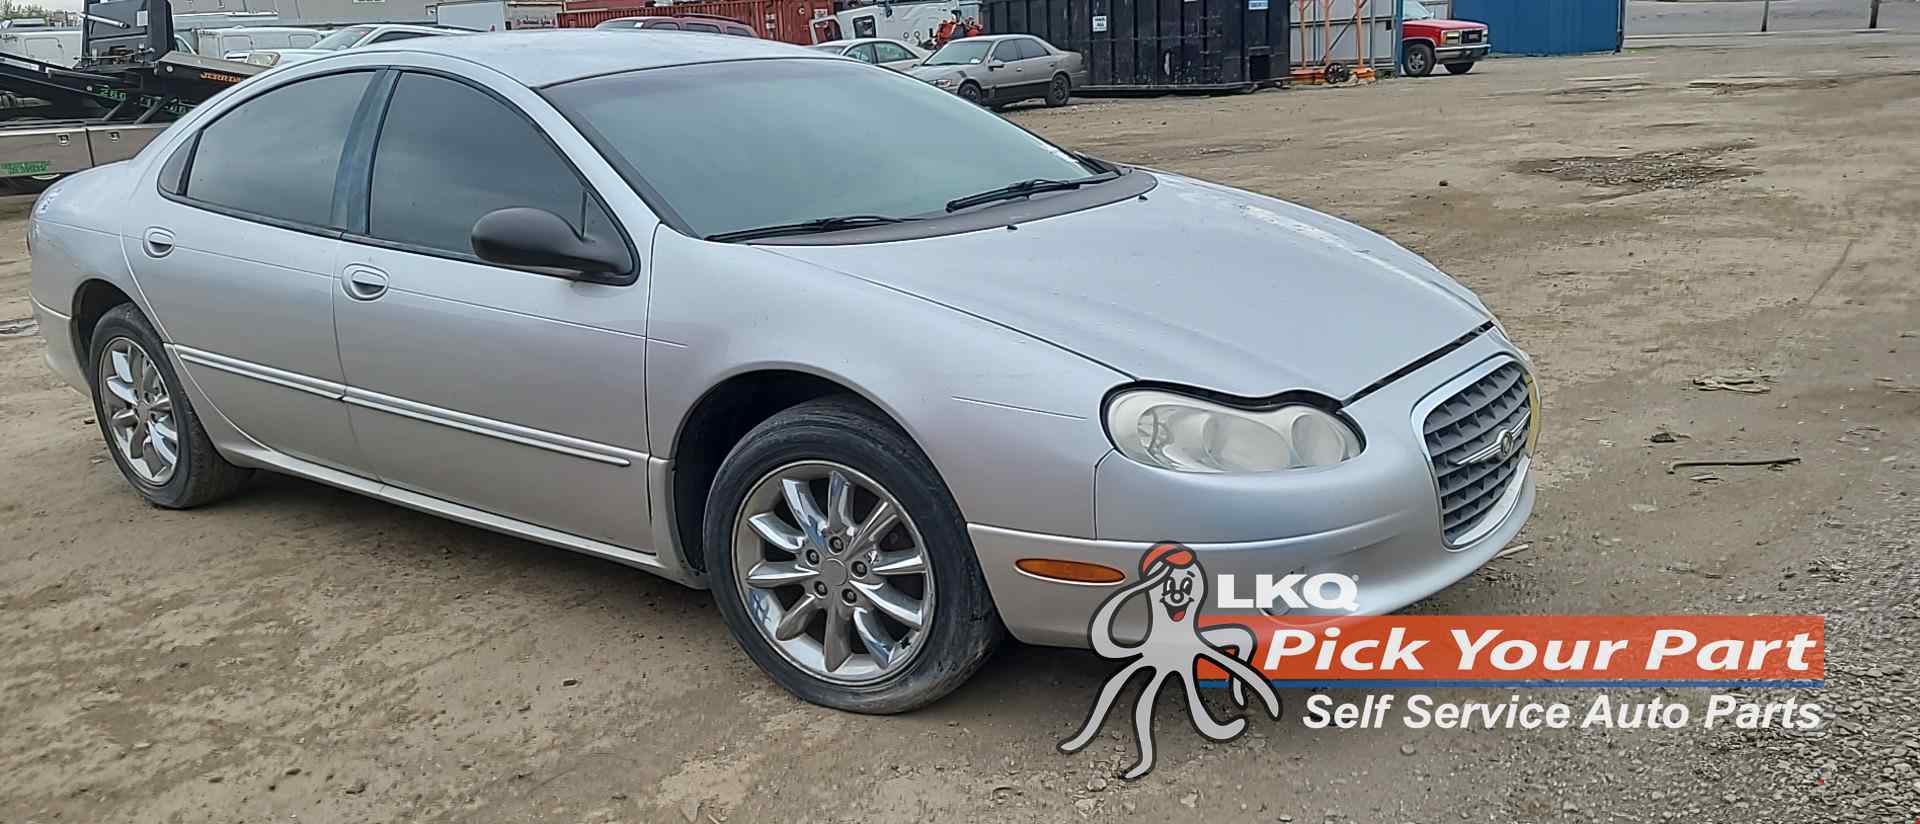 2004 Chrysler Concorde Used Auto Parts | Fort Wayne